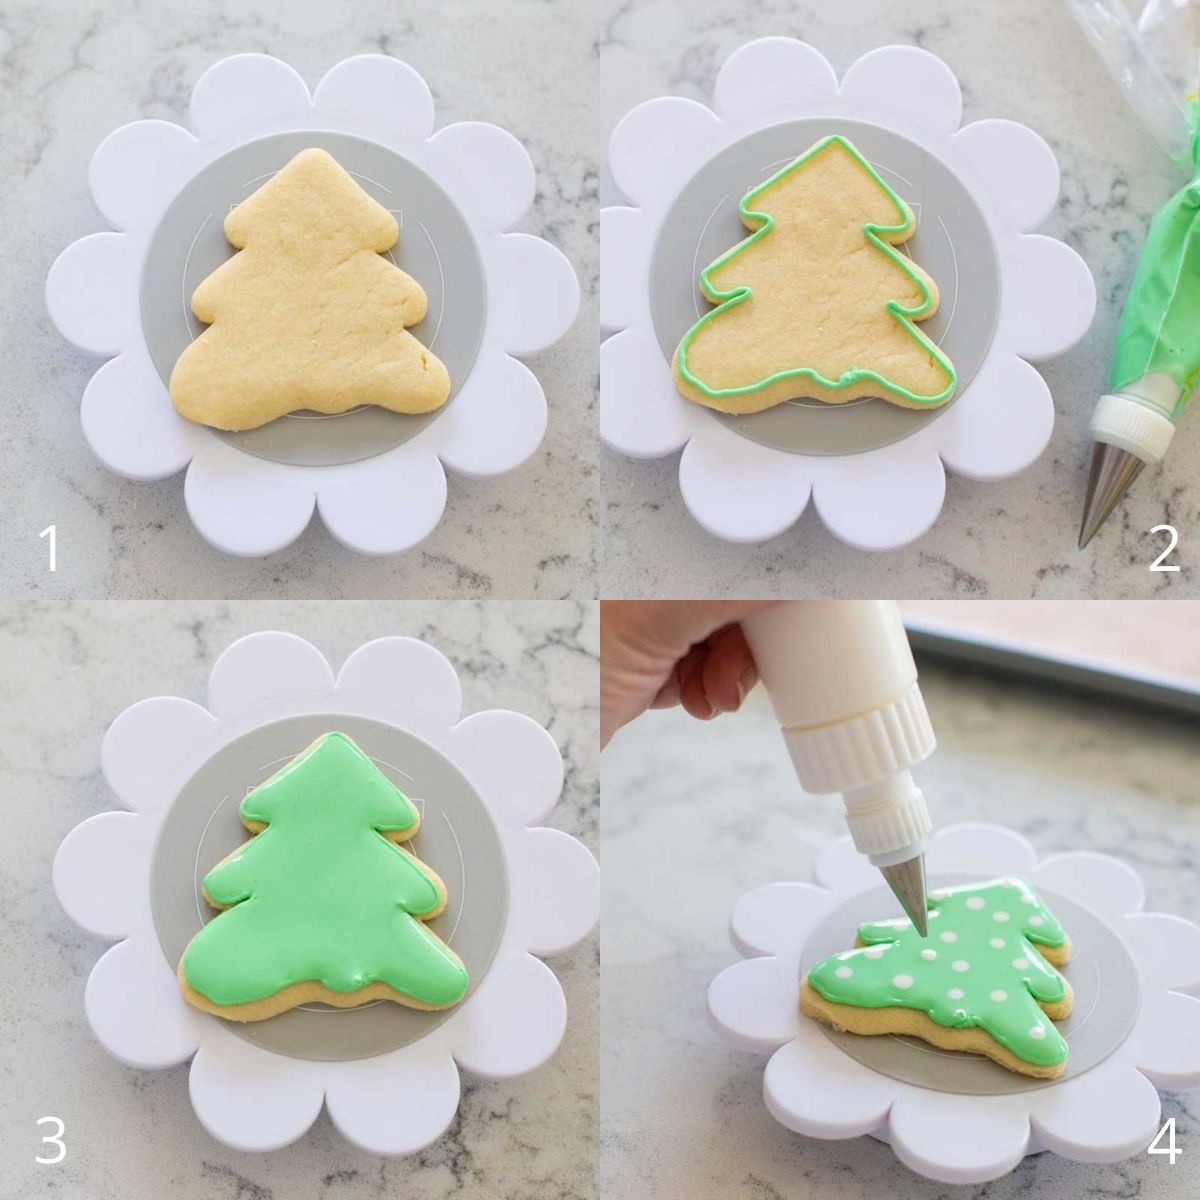 Step by step photo collage shows the basic steps to decorating sugar cookies with royal icing.